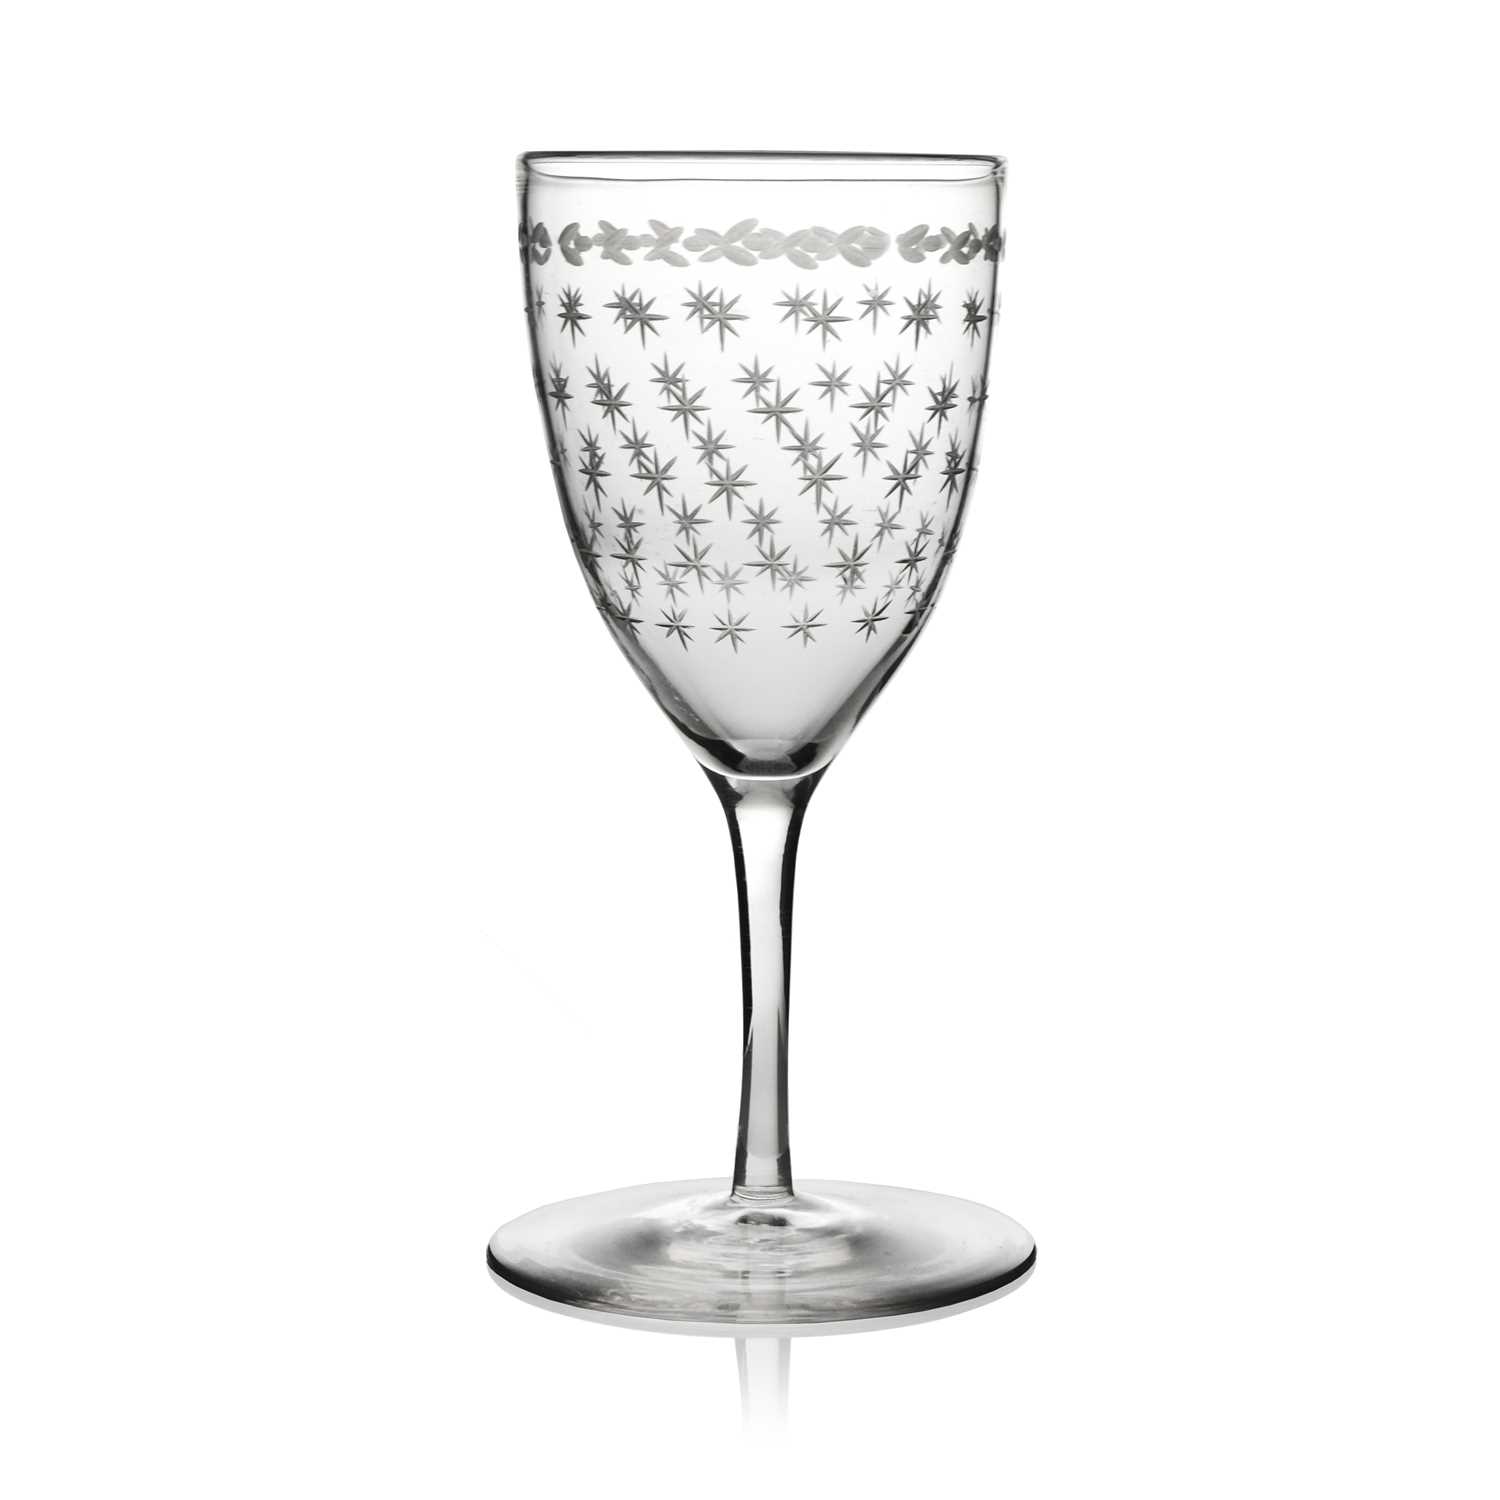 James Powell and Sons, Whitefriars, a Victorian Neoclassical wine glass, circa 1860, model 1027, the